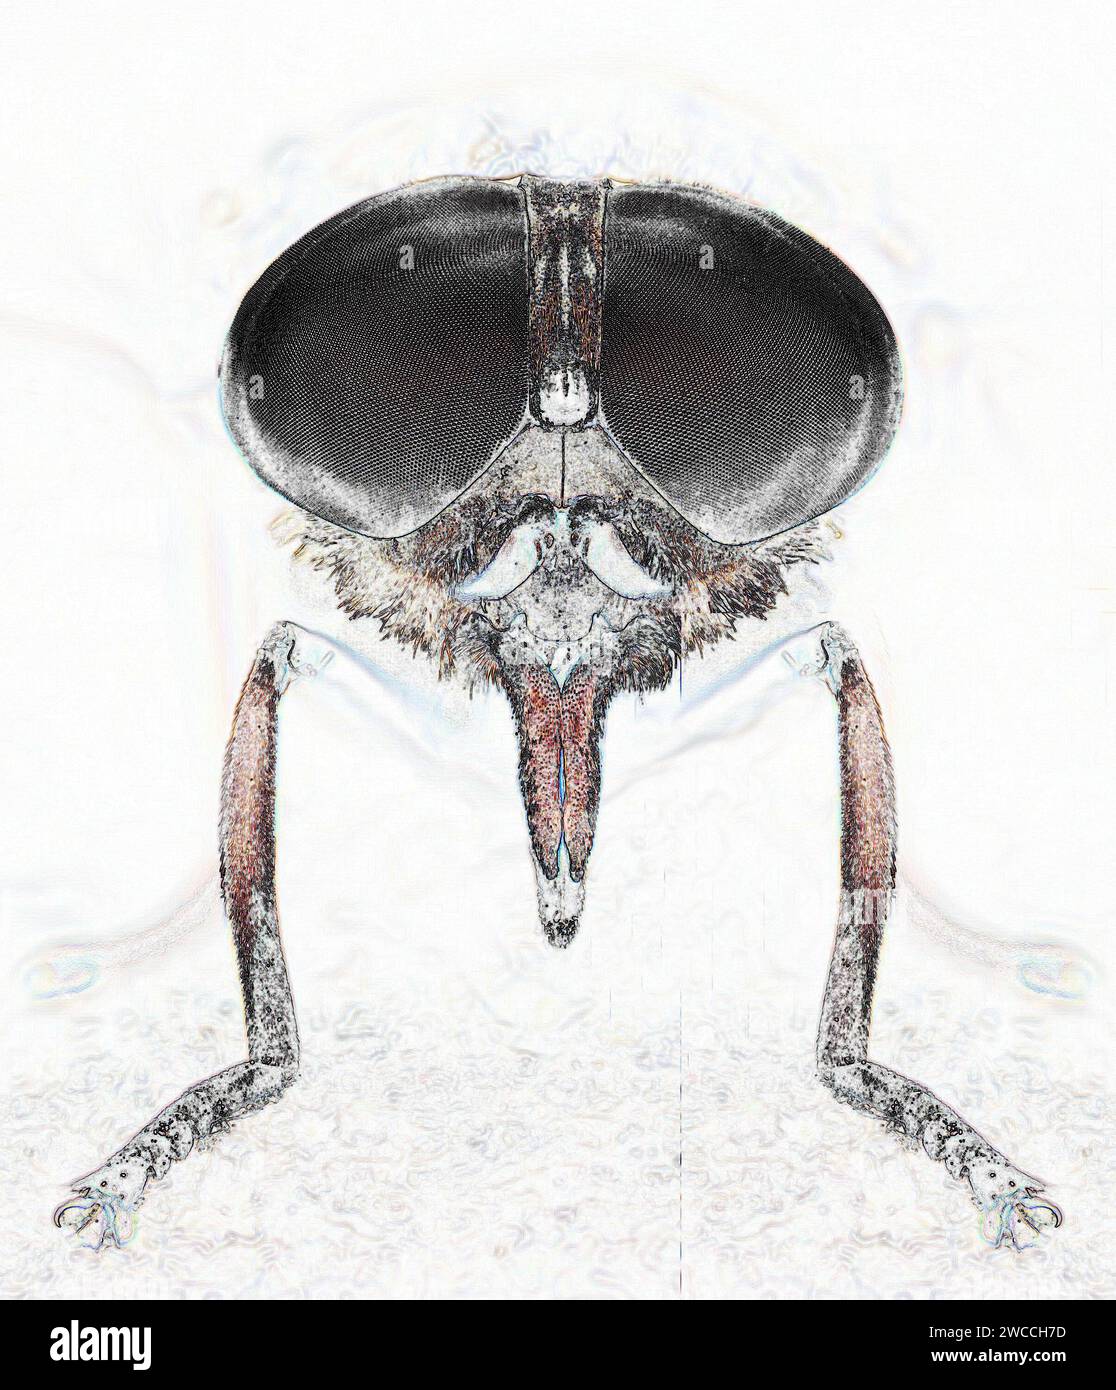 Simplified monochromed image of the head of the Dark Giant Horsefly Tabanus sudeticus emphasising its large compound eyes and piercing proboscis Stock Photo